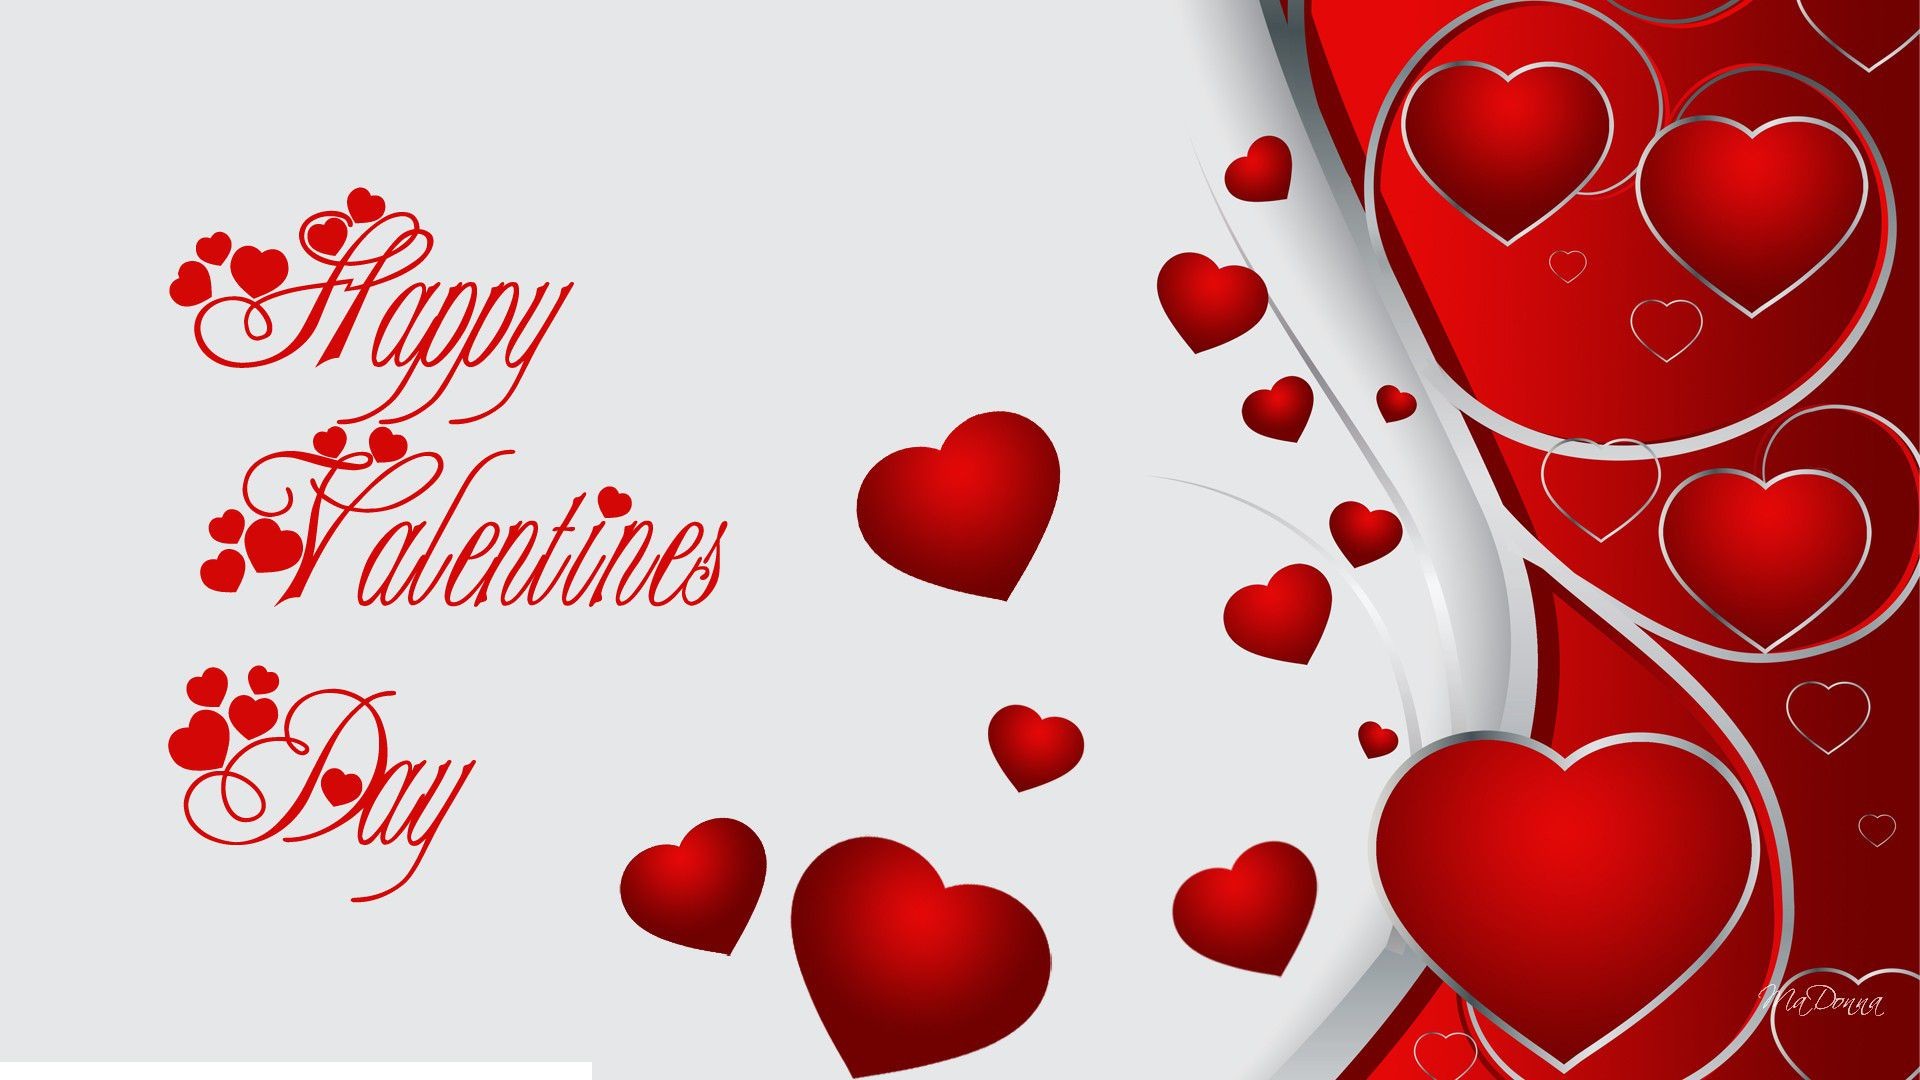 1920x1080 Happy valentines day hd wallpaper with red hearts